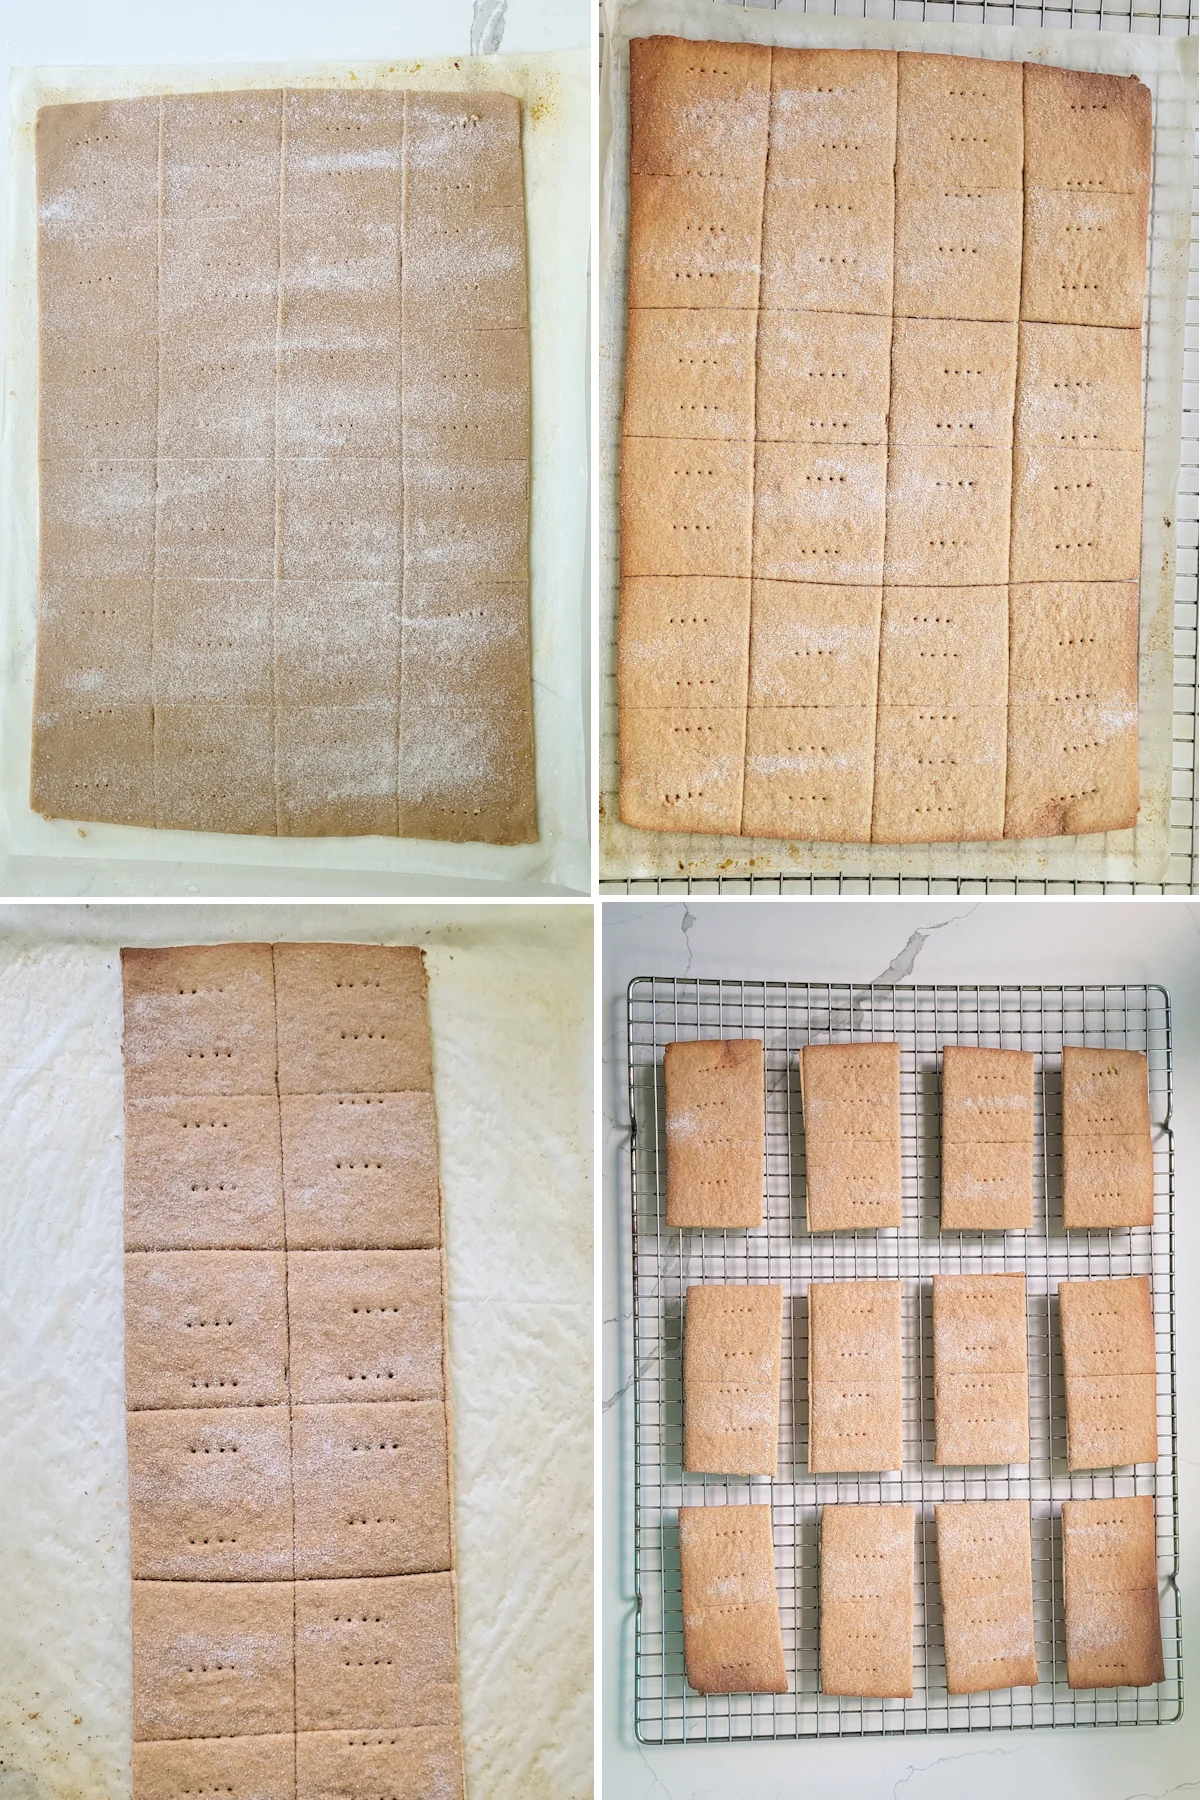 Graham crackers before and after baking.